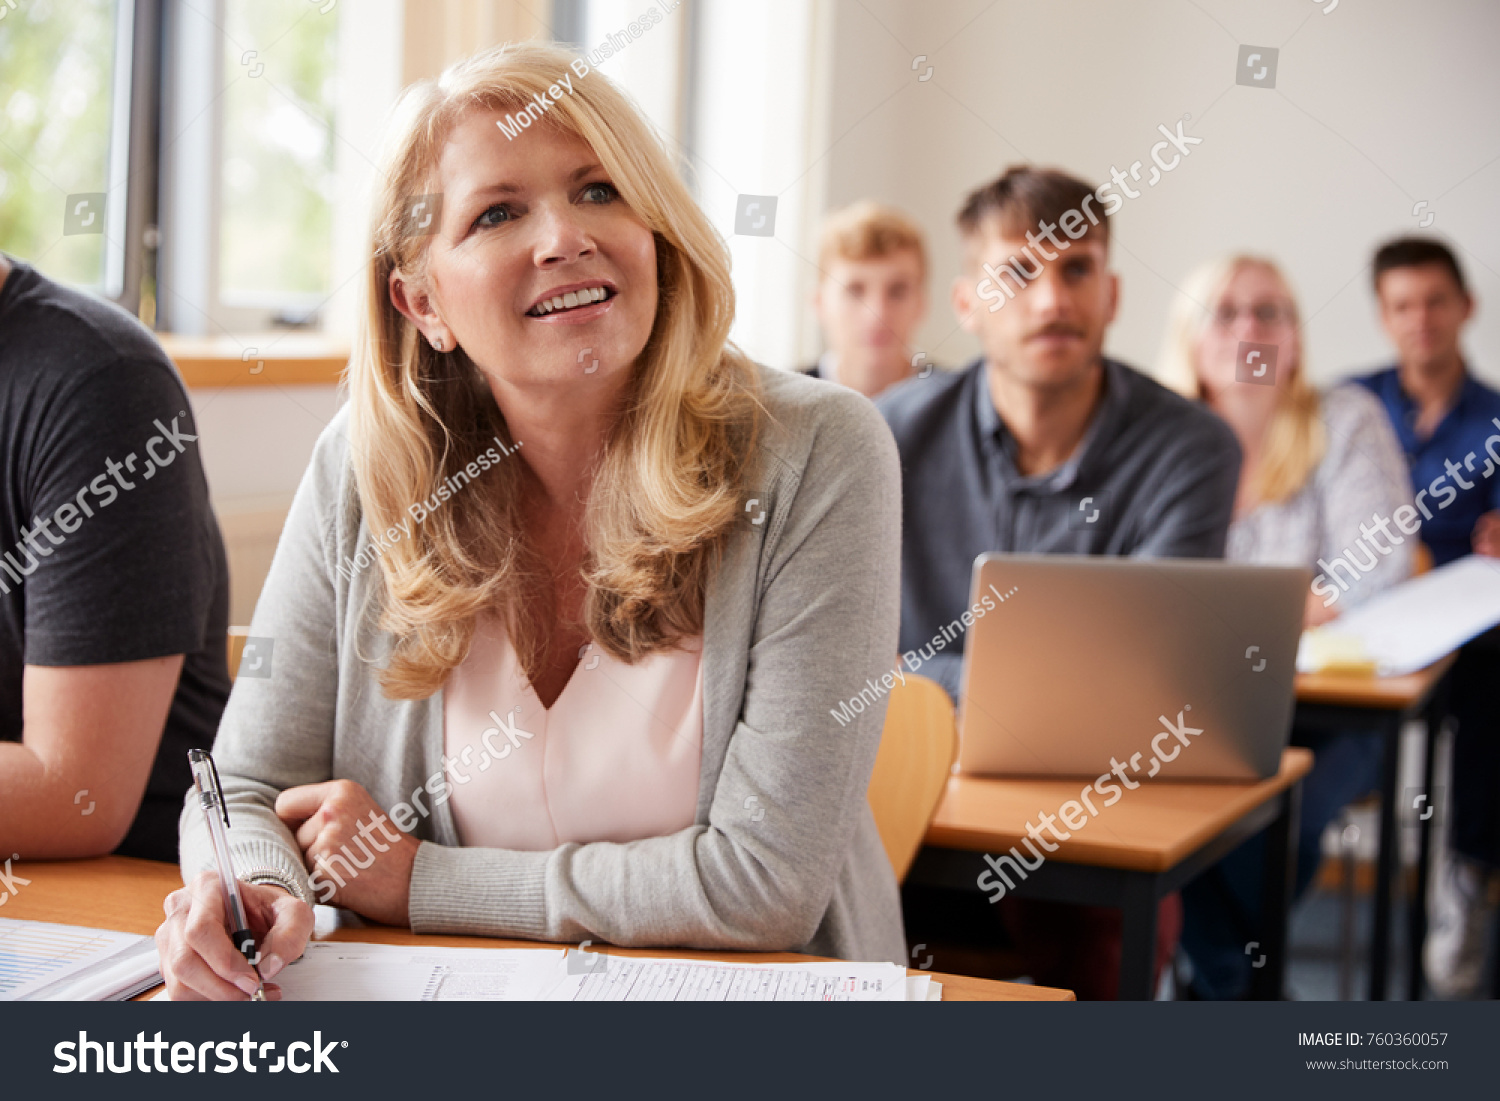 Mature Woman In College Attending Adult Education Class #760360057